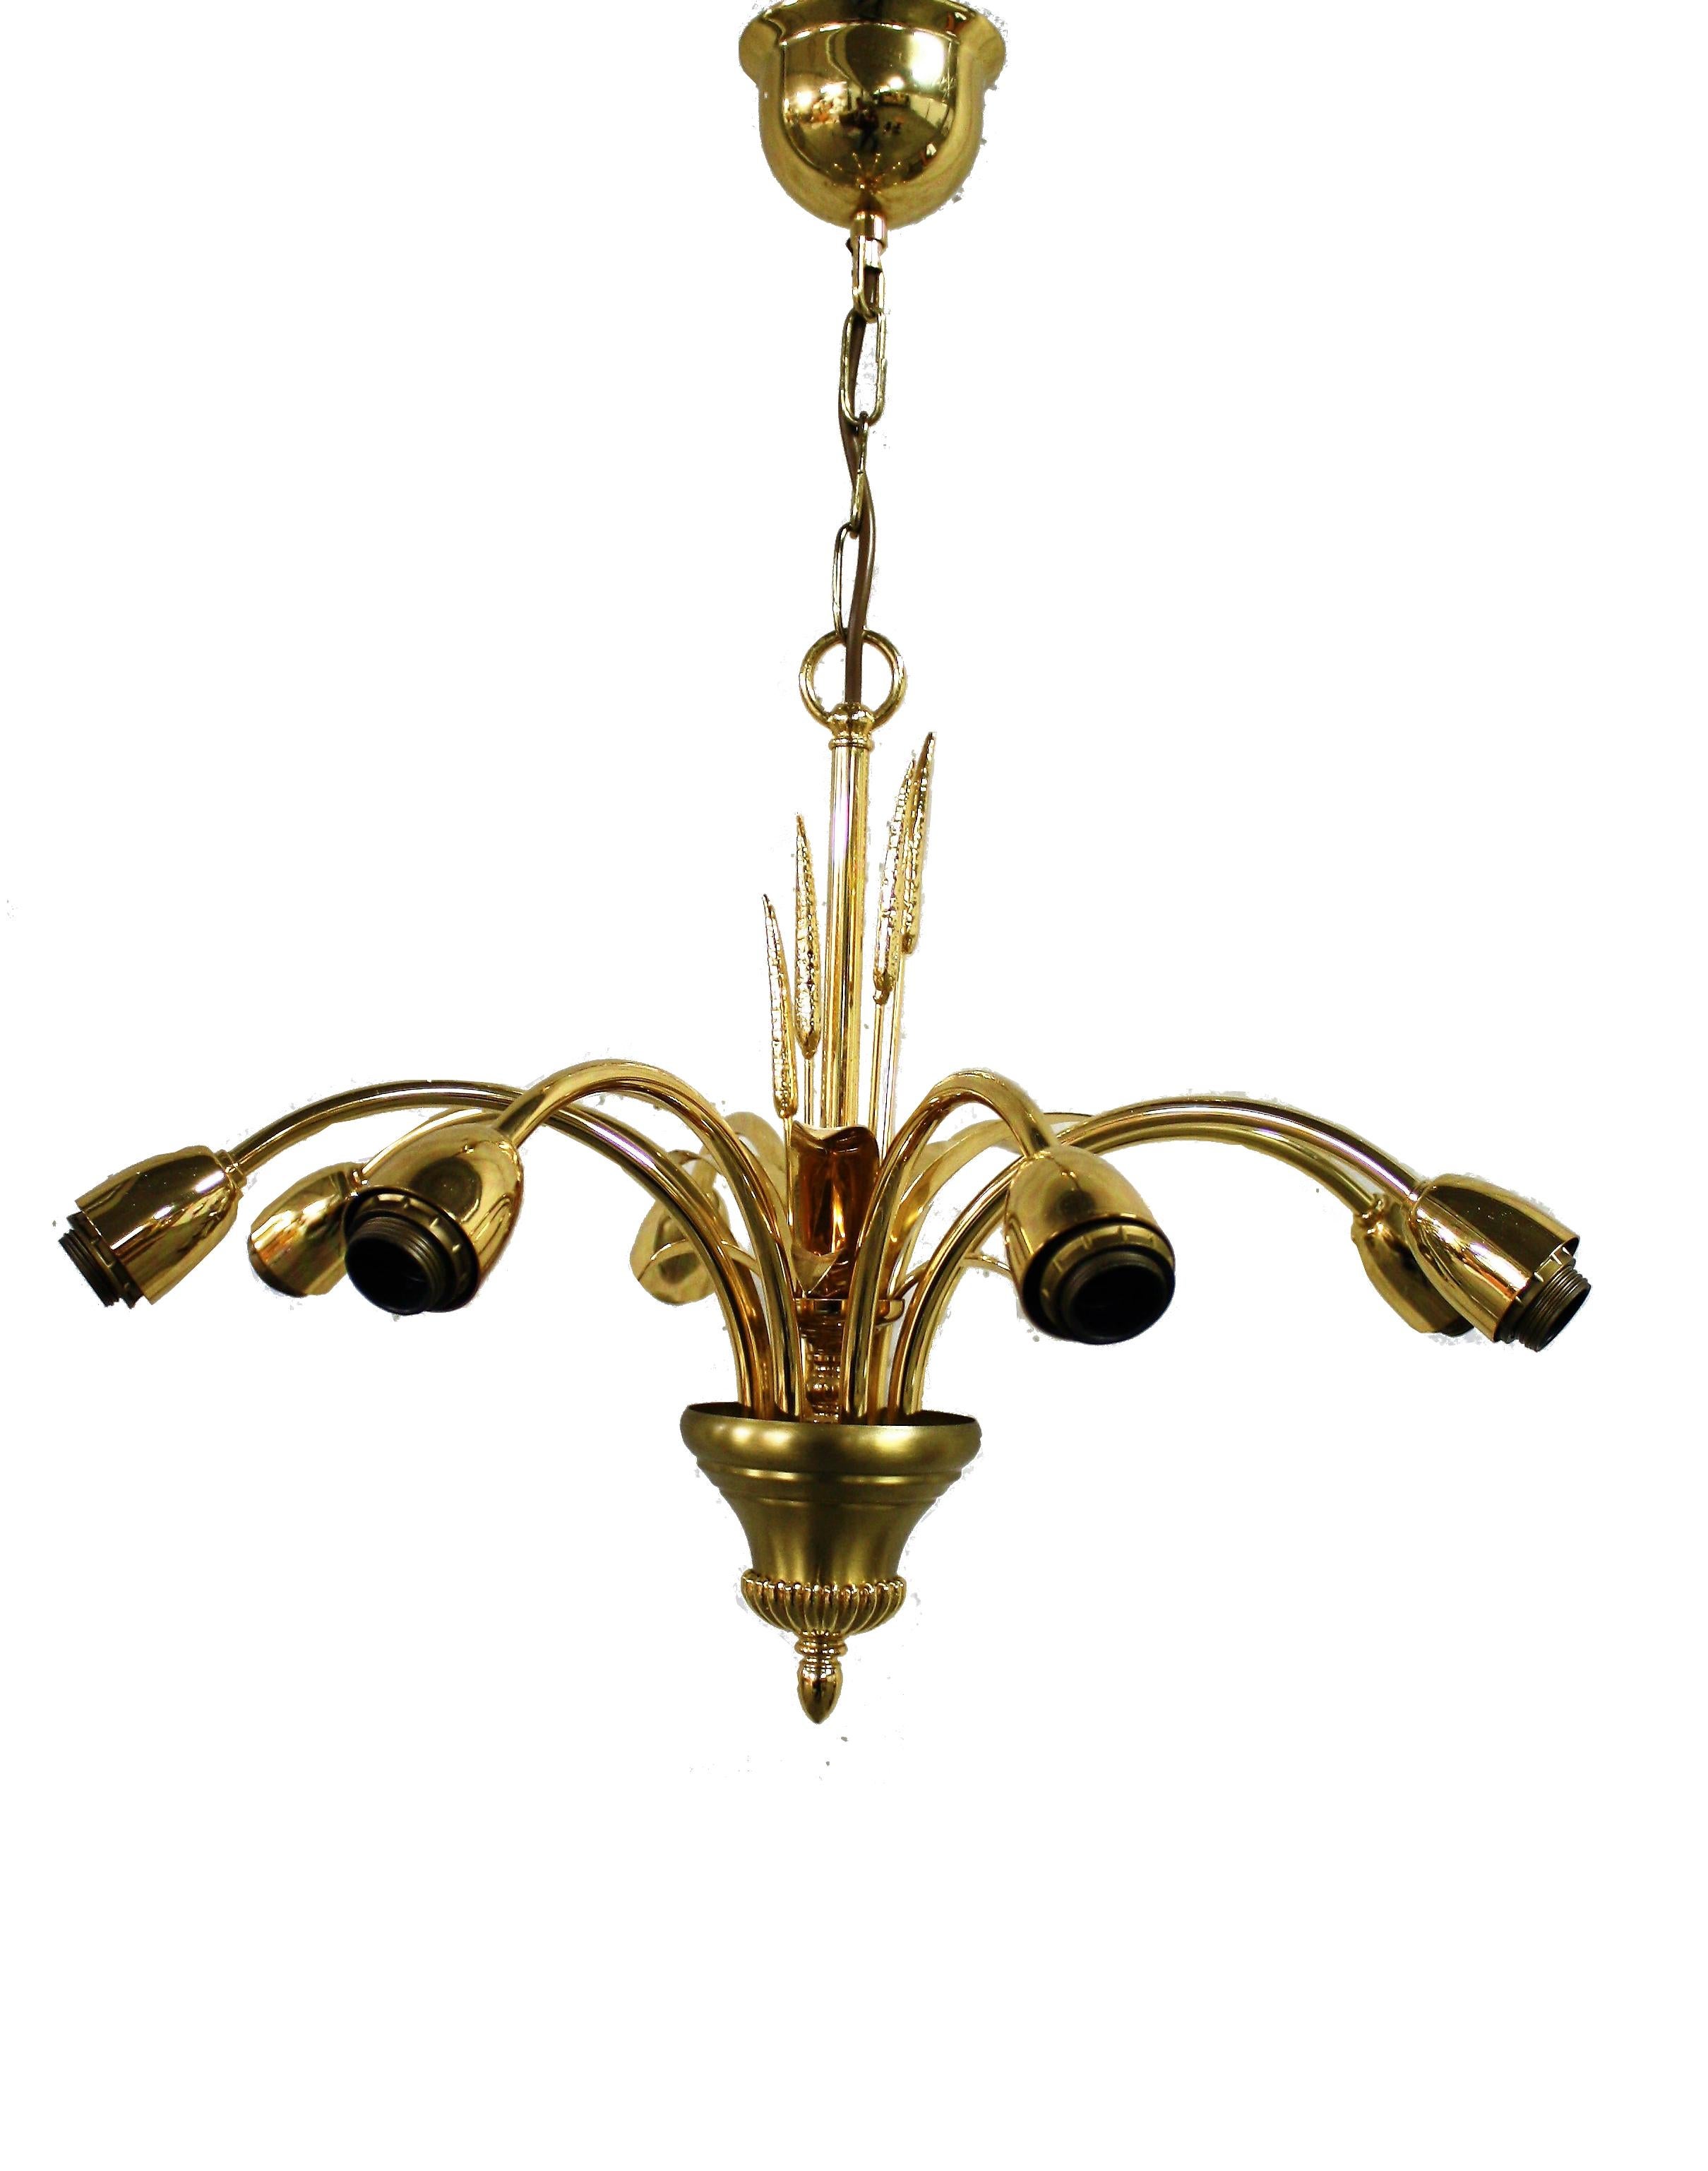 Charming regency chandelier with eight lightpoints.

This vintage chandelier is made from brass and respresents a vase with wheat and leaves.

It comes with flower shaped shades made from shell.

Tested and ready to use. This chandelier is to